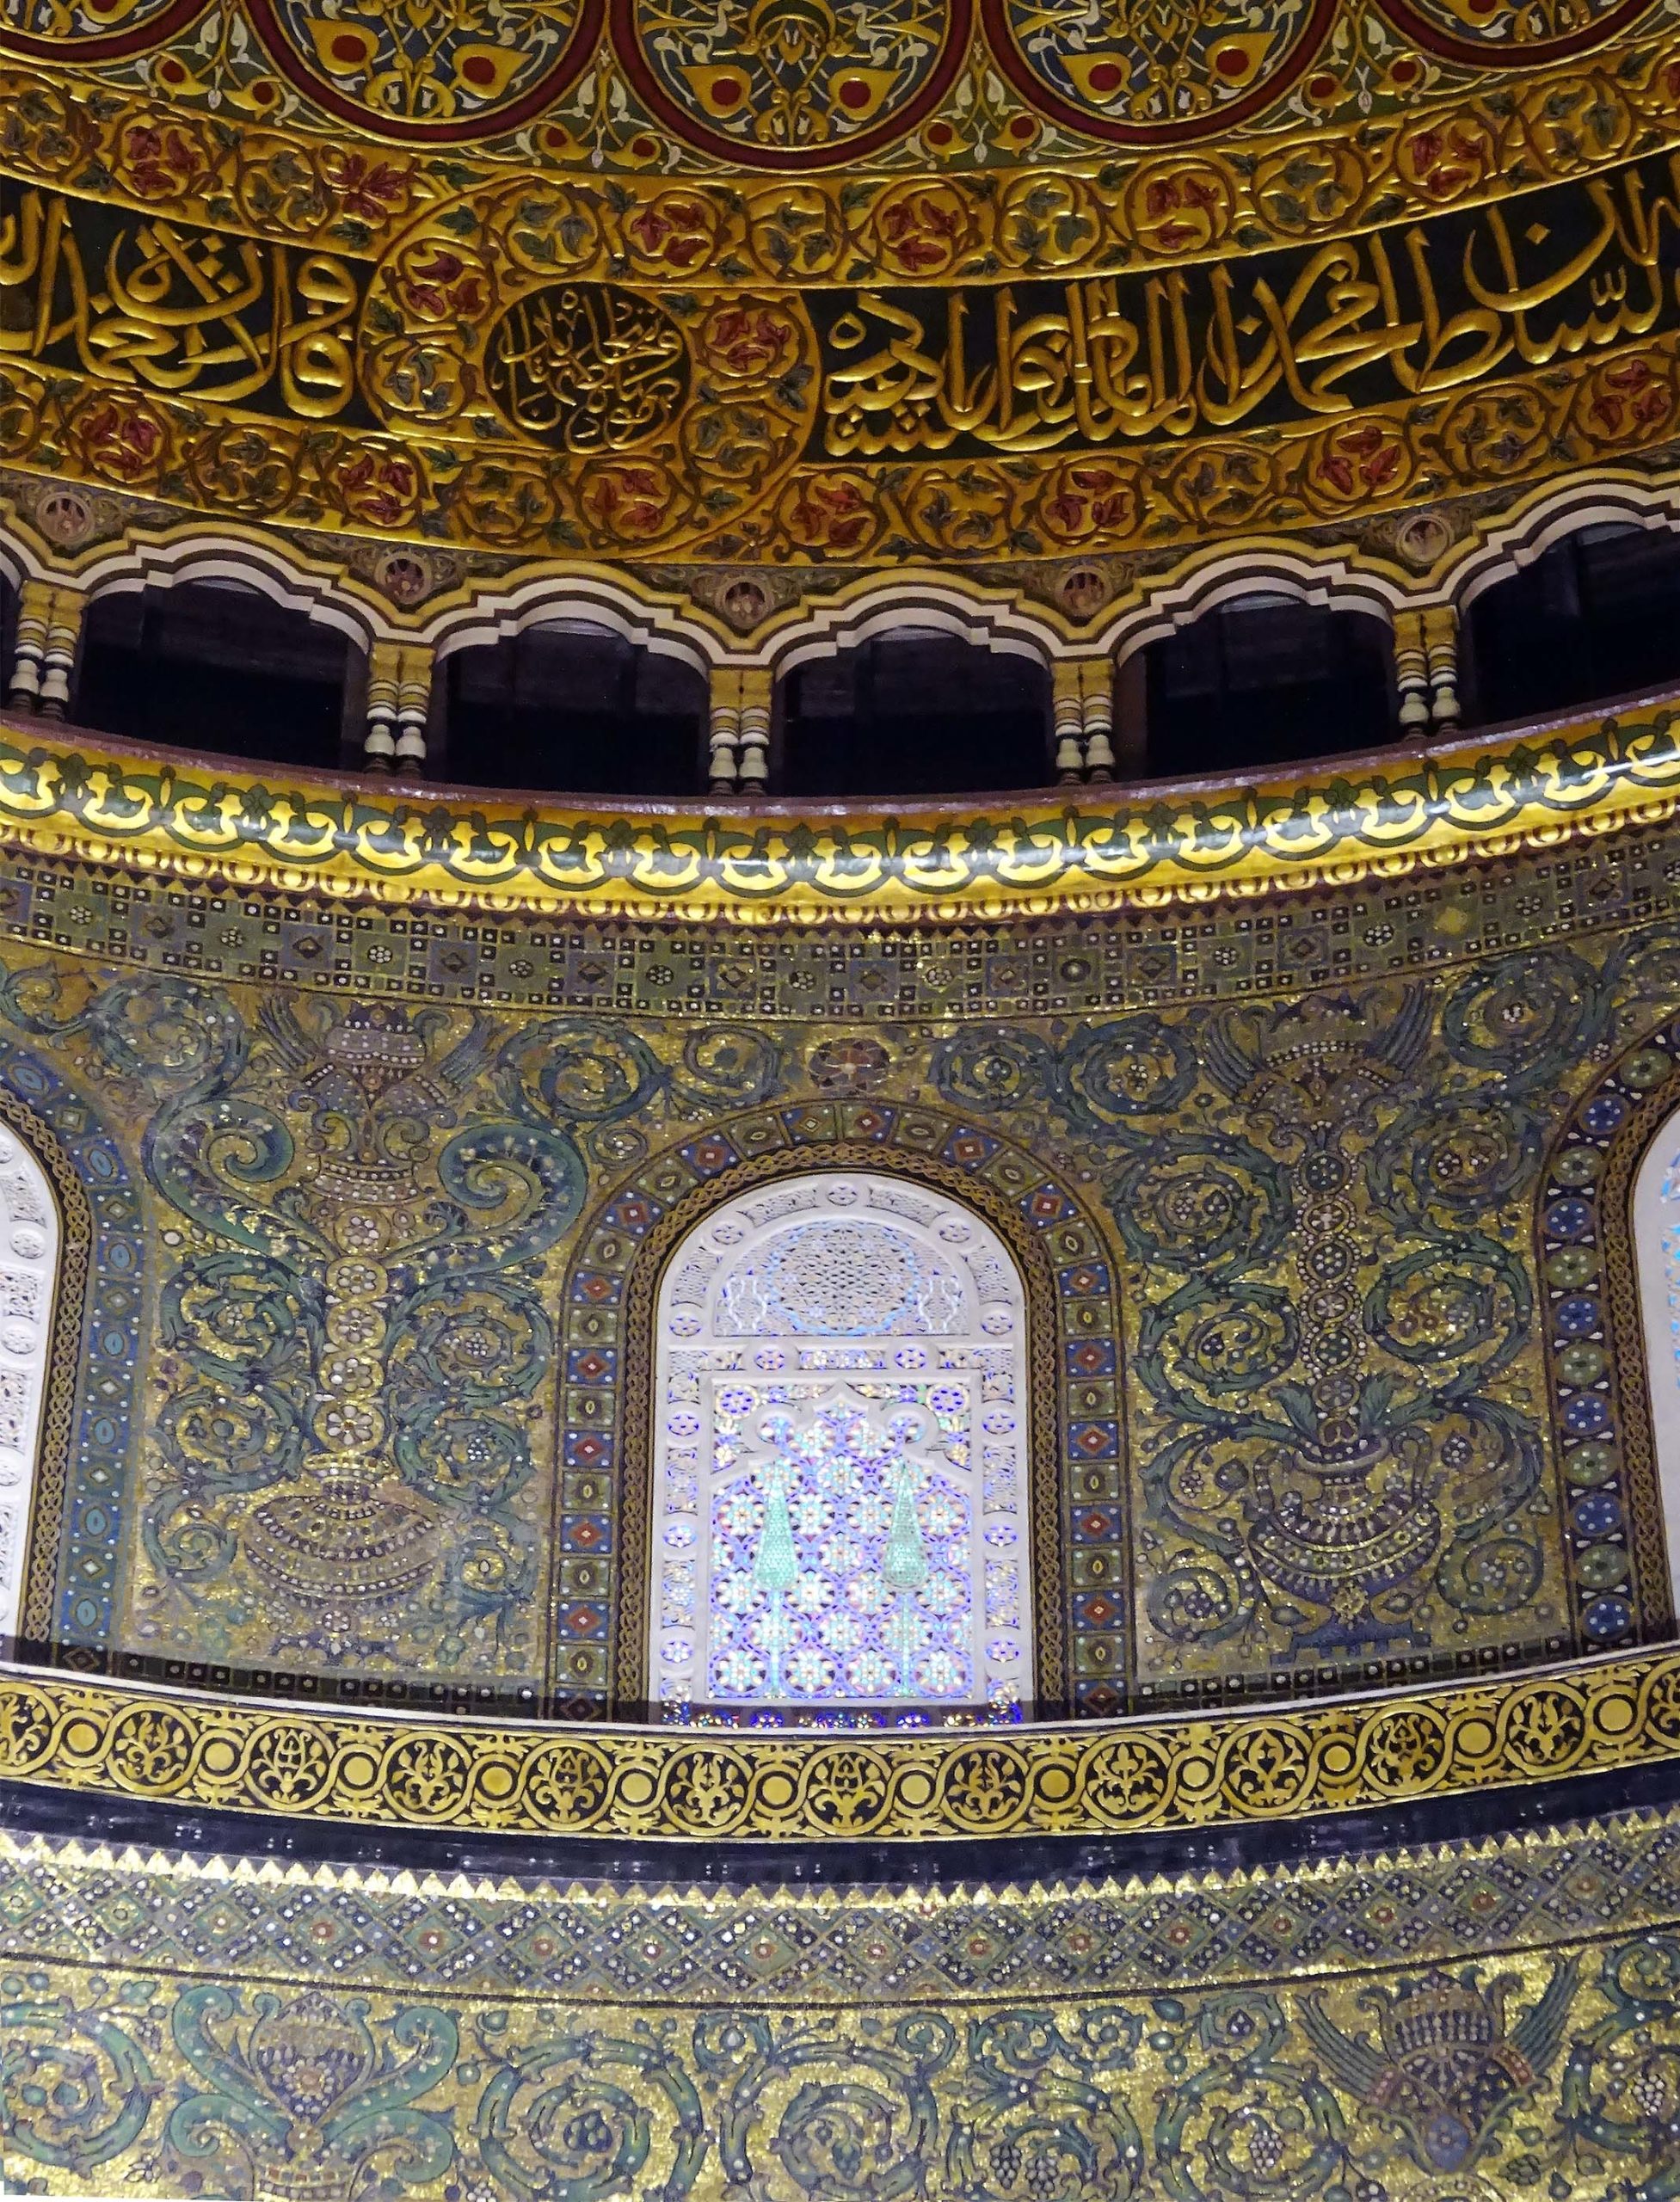 The Dome of the Rock (Qubbat al-Sakhra) (article)